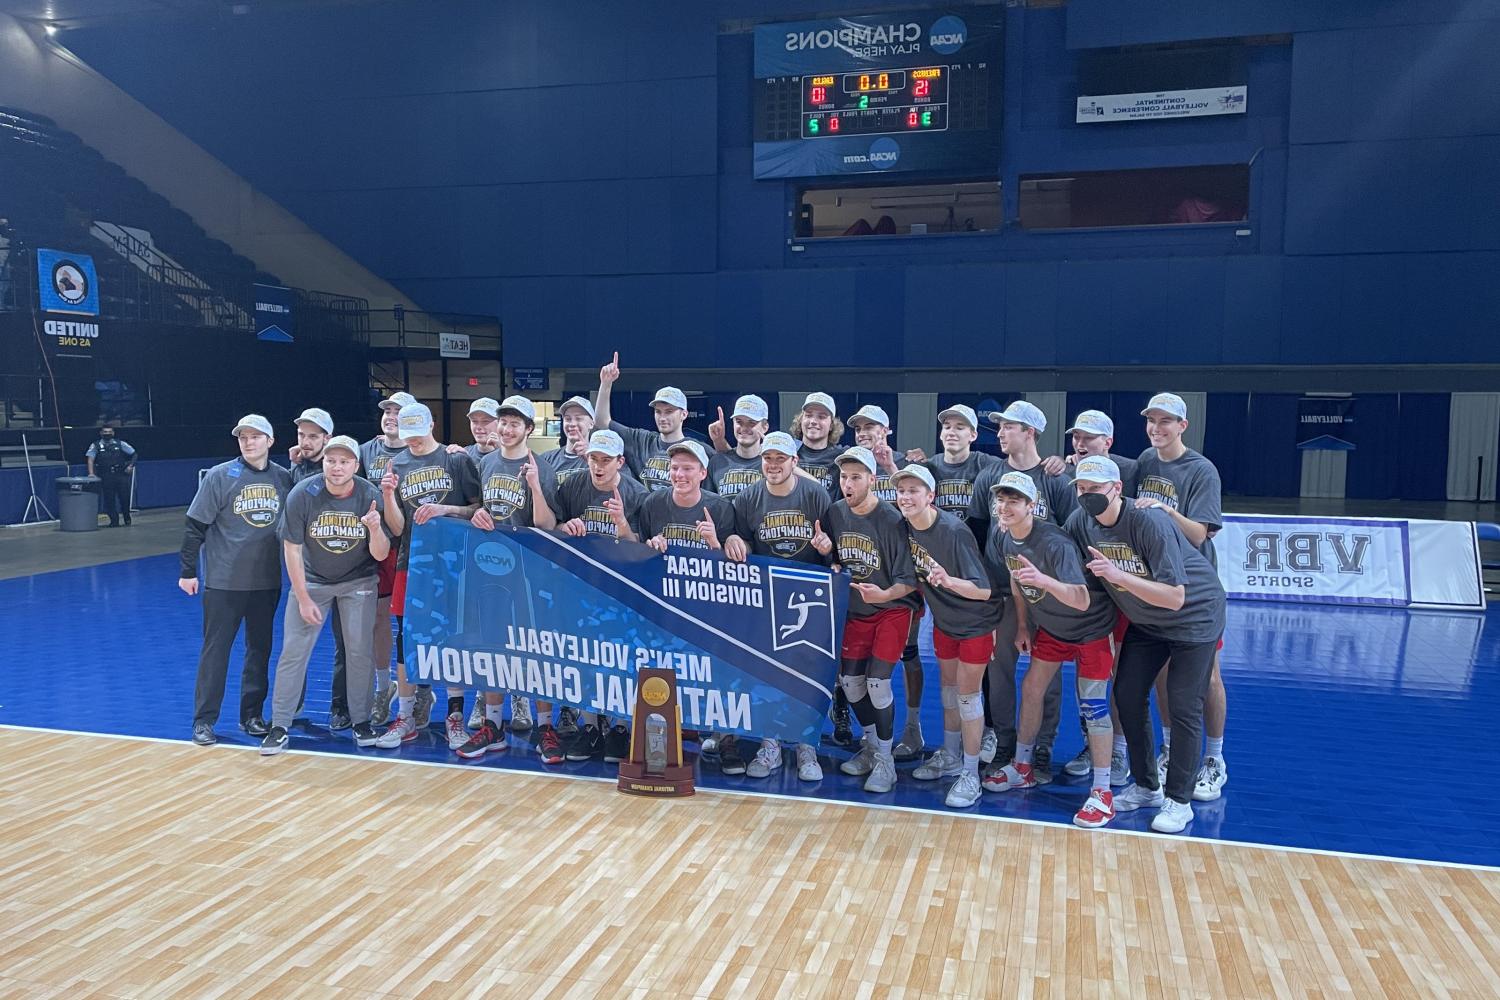 The Carthage Men's Volleyball team won Carthage its first national team championship in April 202...